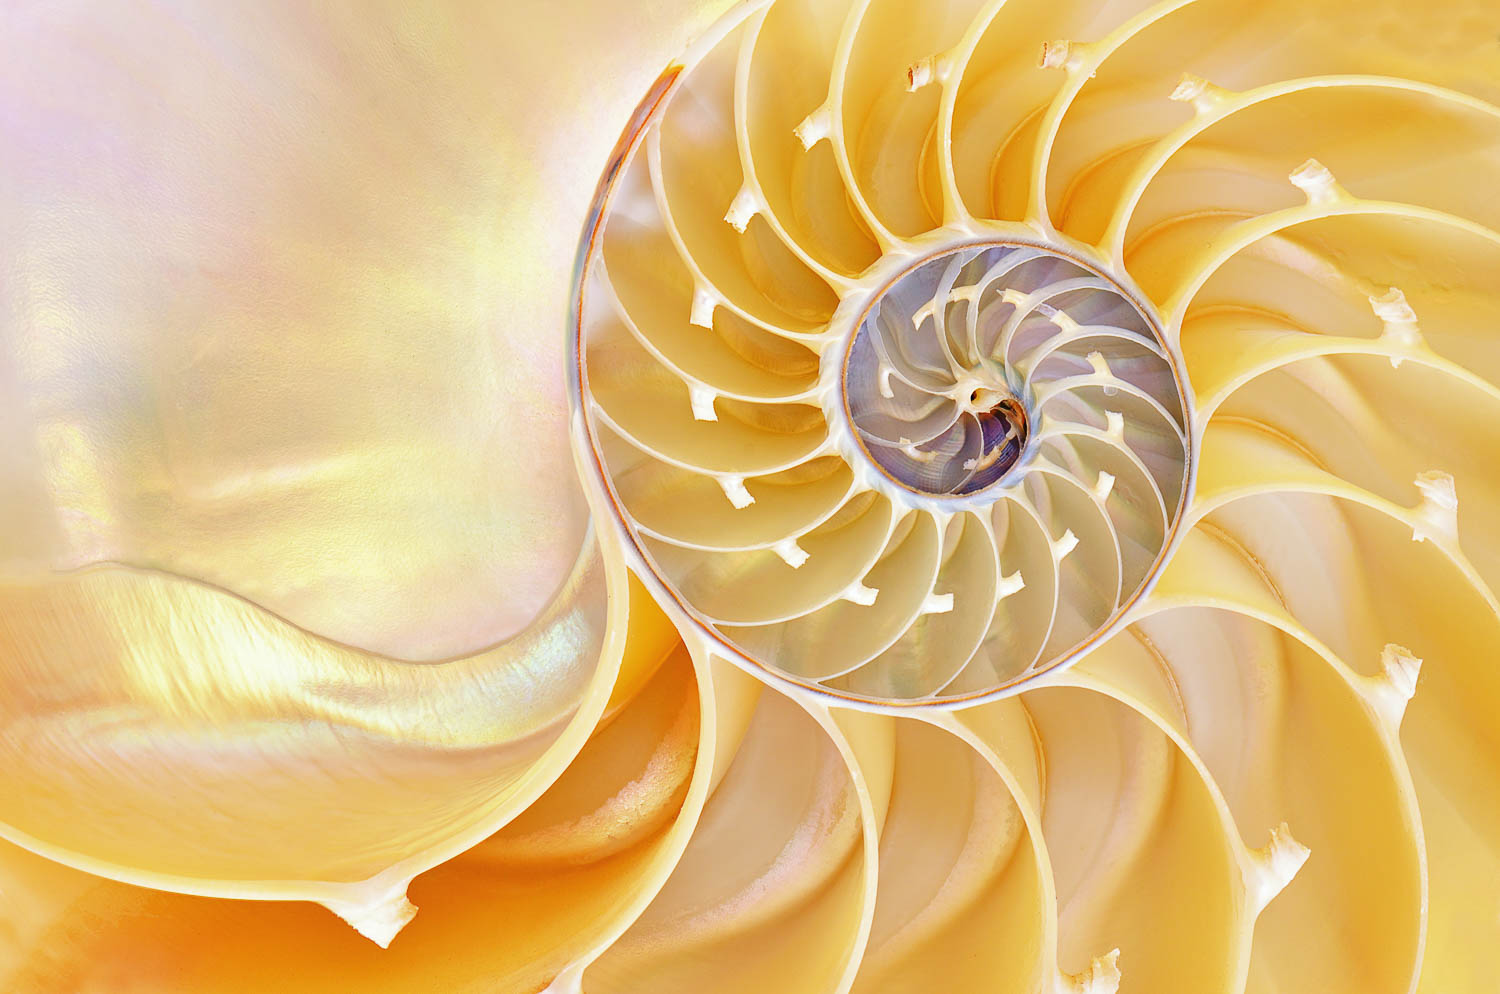 Close-up of a nautilus shell showing its spiral structure and natural gradient colors.